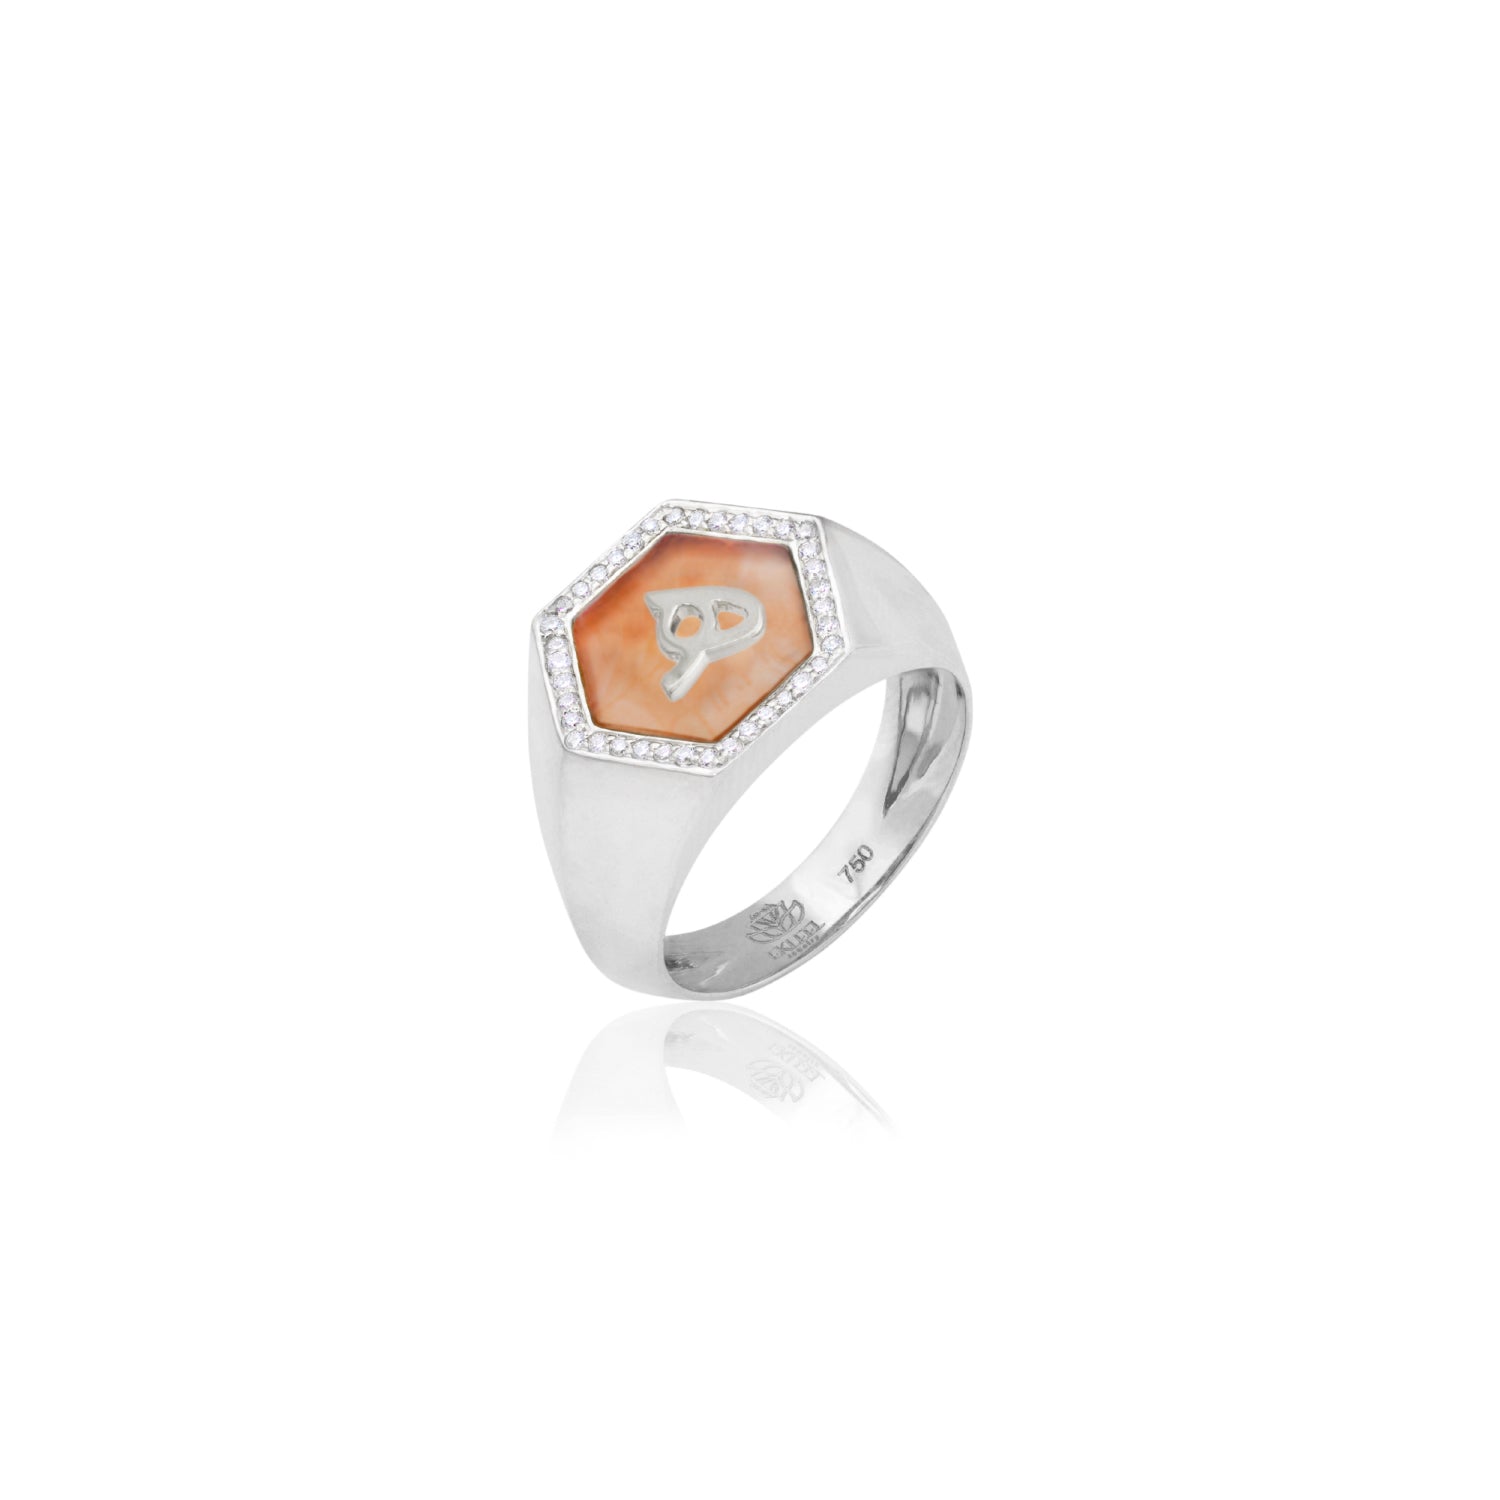 Qamoos 2.0 Letter هـ Carnelian and Diamond Signet Ring in White Gold